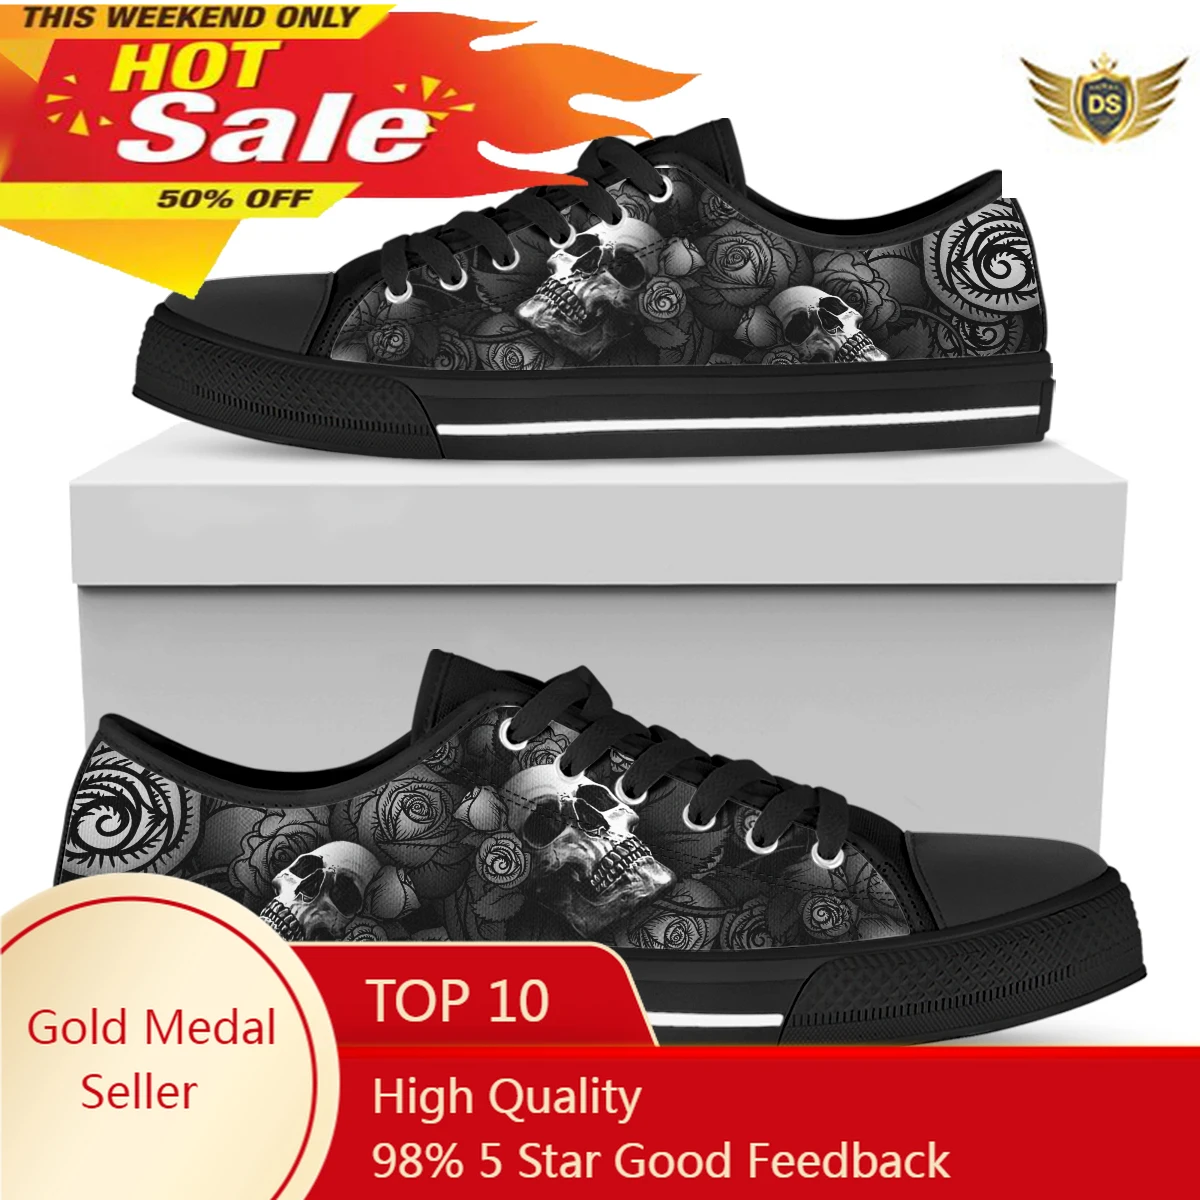 Retro Rose Skull Grey Autumn Women's Shoes Trend Fashion Female Low-Top Flats Shoes Women Sneakers Casual Shoes casual shoes women genuine leather wedges high heel ankle boots female round toe fashion sneakers platform low top oxfords shoes